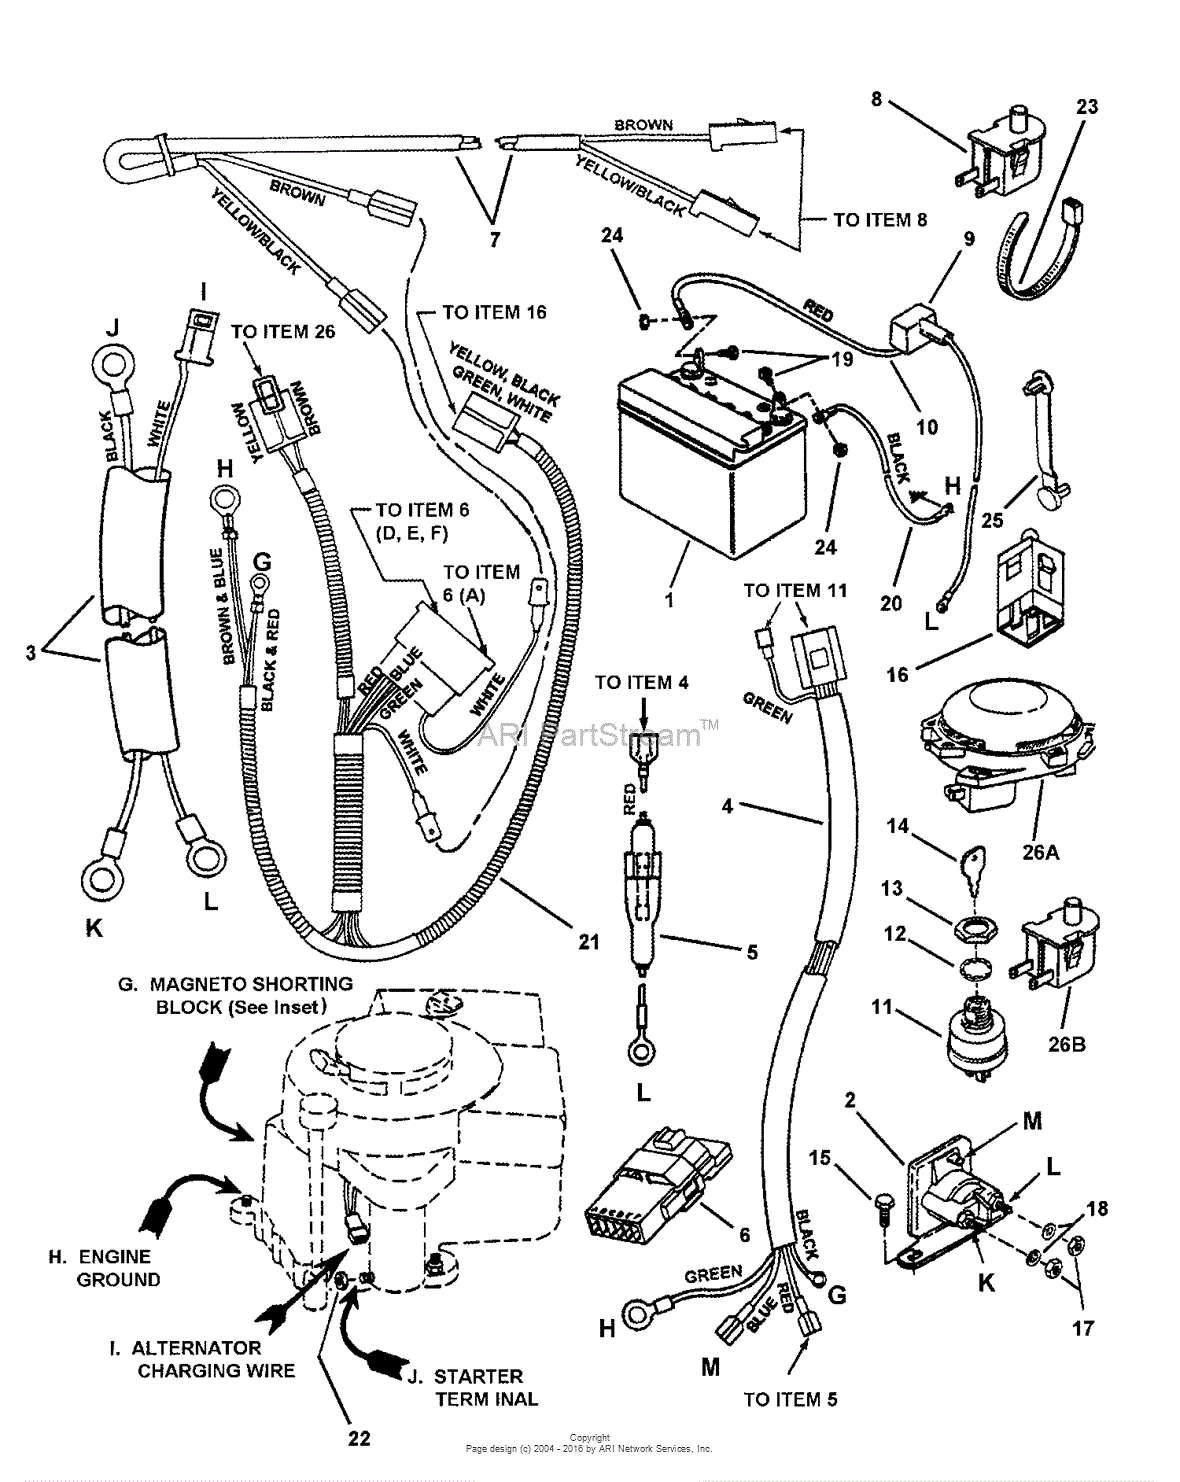 snapper riding lawn mower wiring diagram